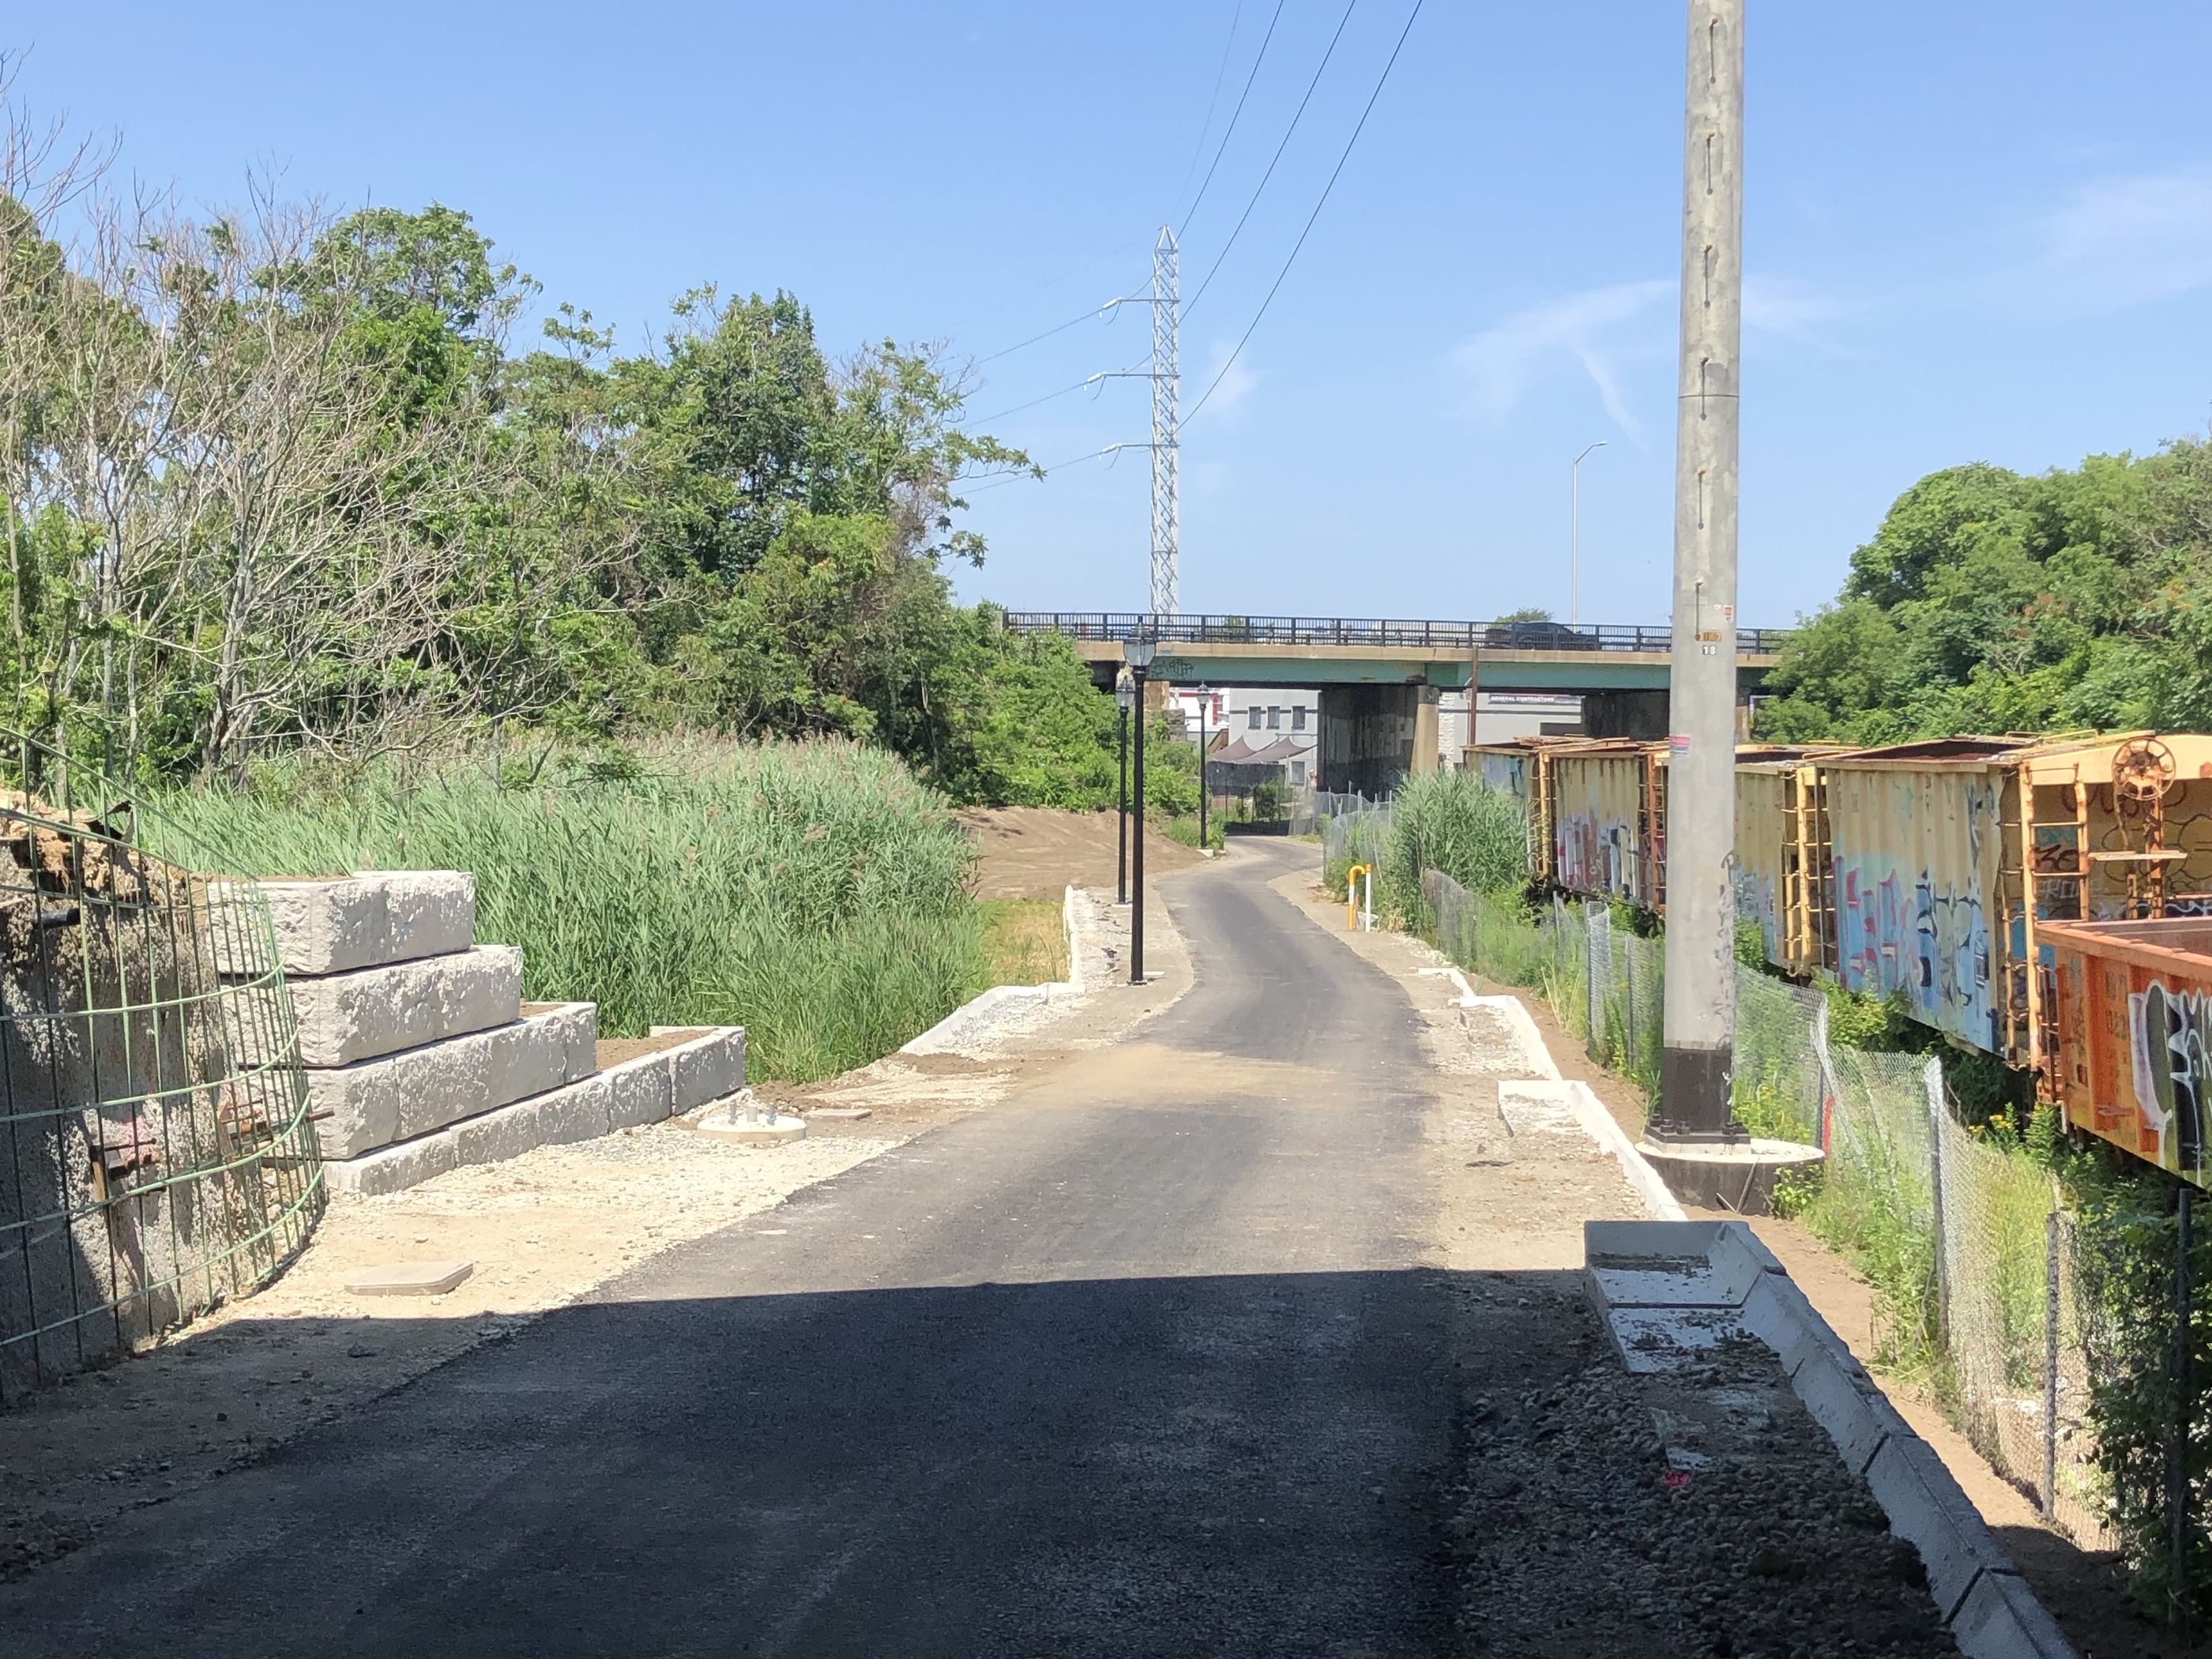 A paved path extends under an overpass in the distance alongside railroad tracks with rusty boxcars and a power line corridor, which run along the right edge of the photo. To the left is a retaining wall and some exposed rebar from an under-construction bridge abutment.